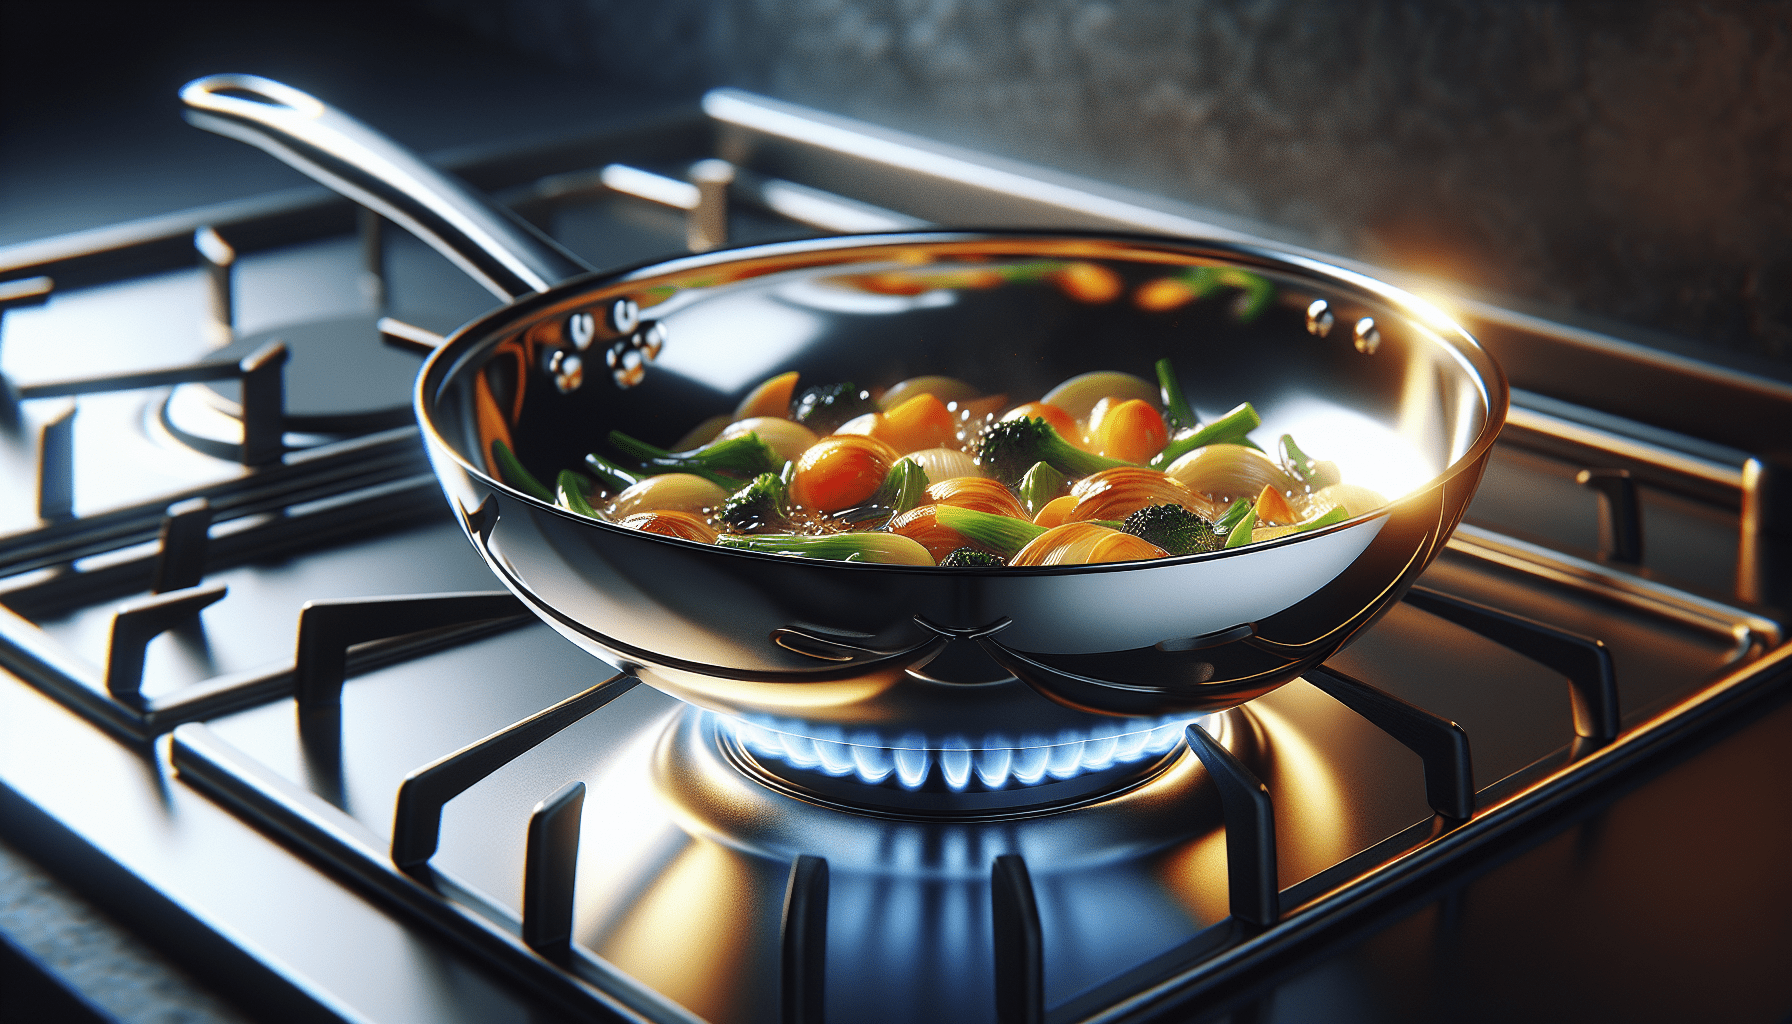 What Kind Of Cookware Is Best For Everyday Use?